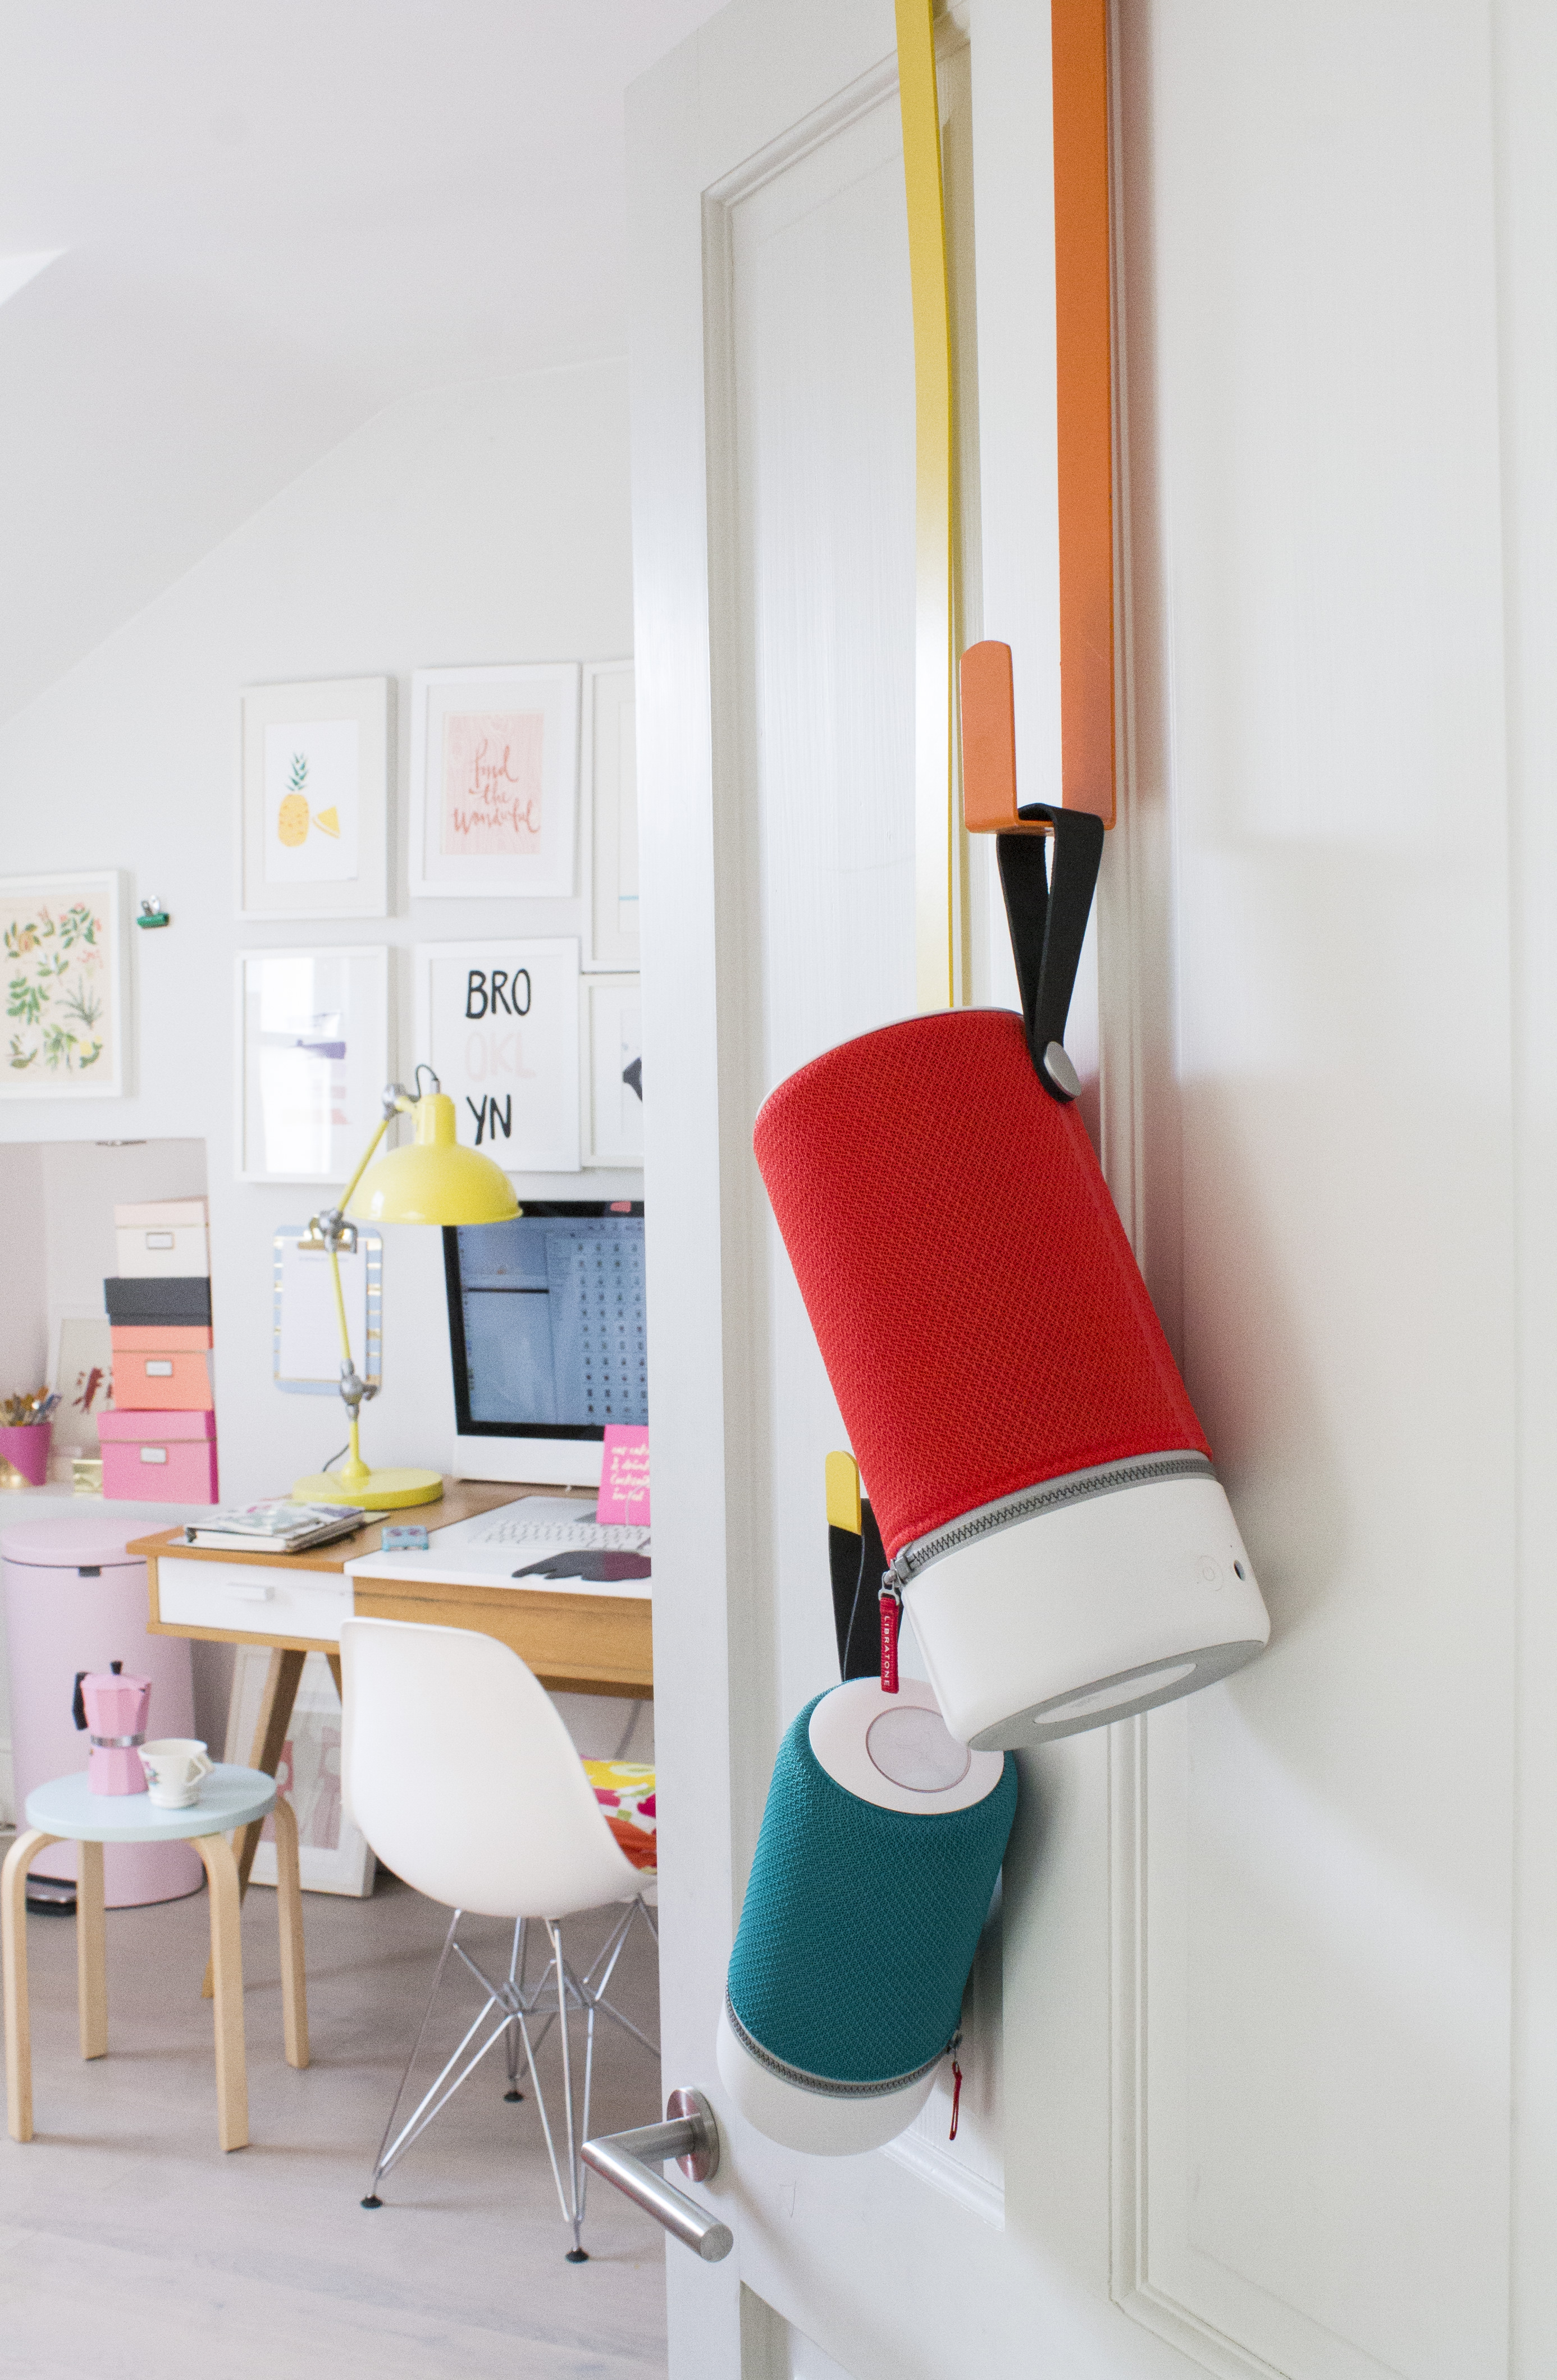 Poratble-bluetooth-speaker-that -can-be-hung-up-Libratone-photo-by-Little-Big-Bell